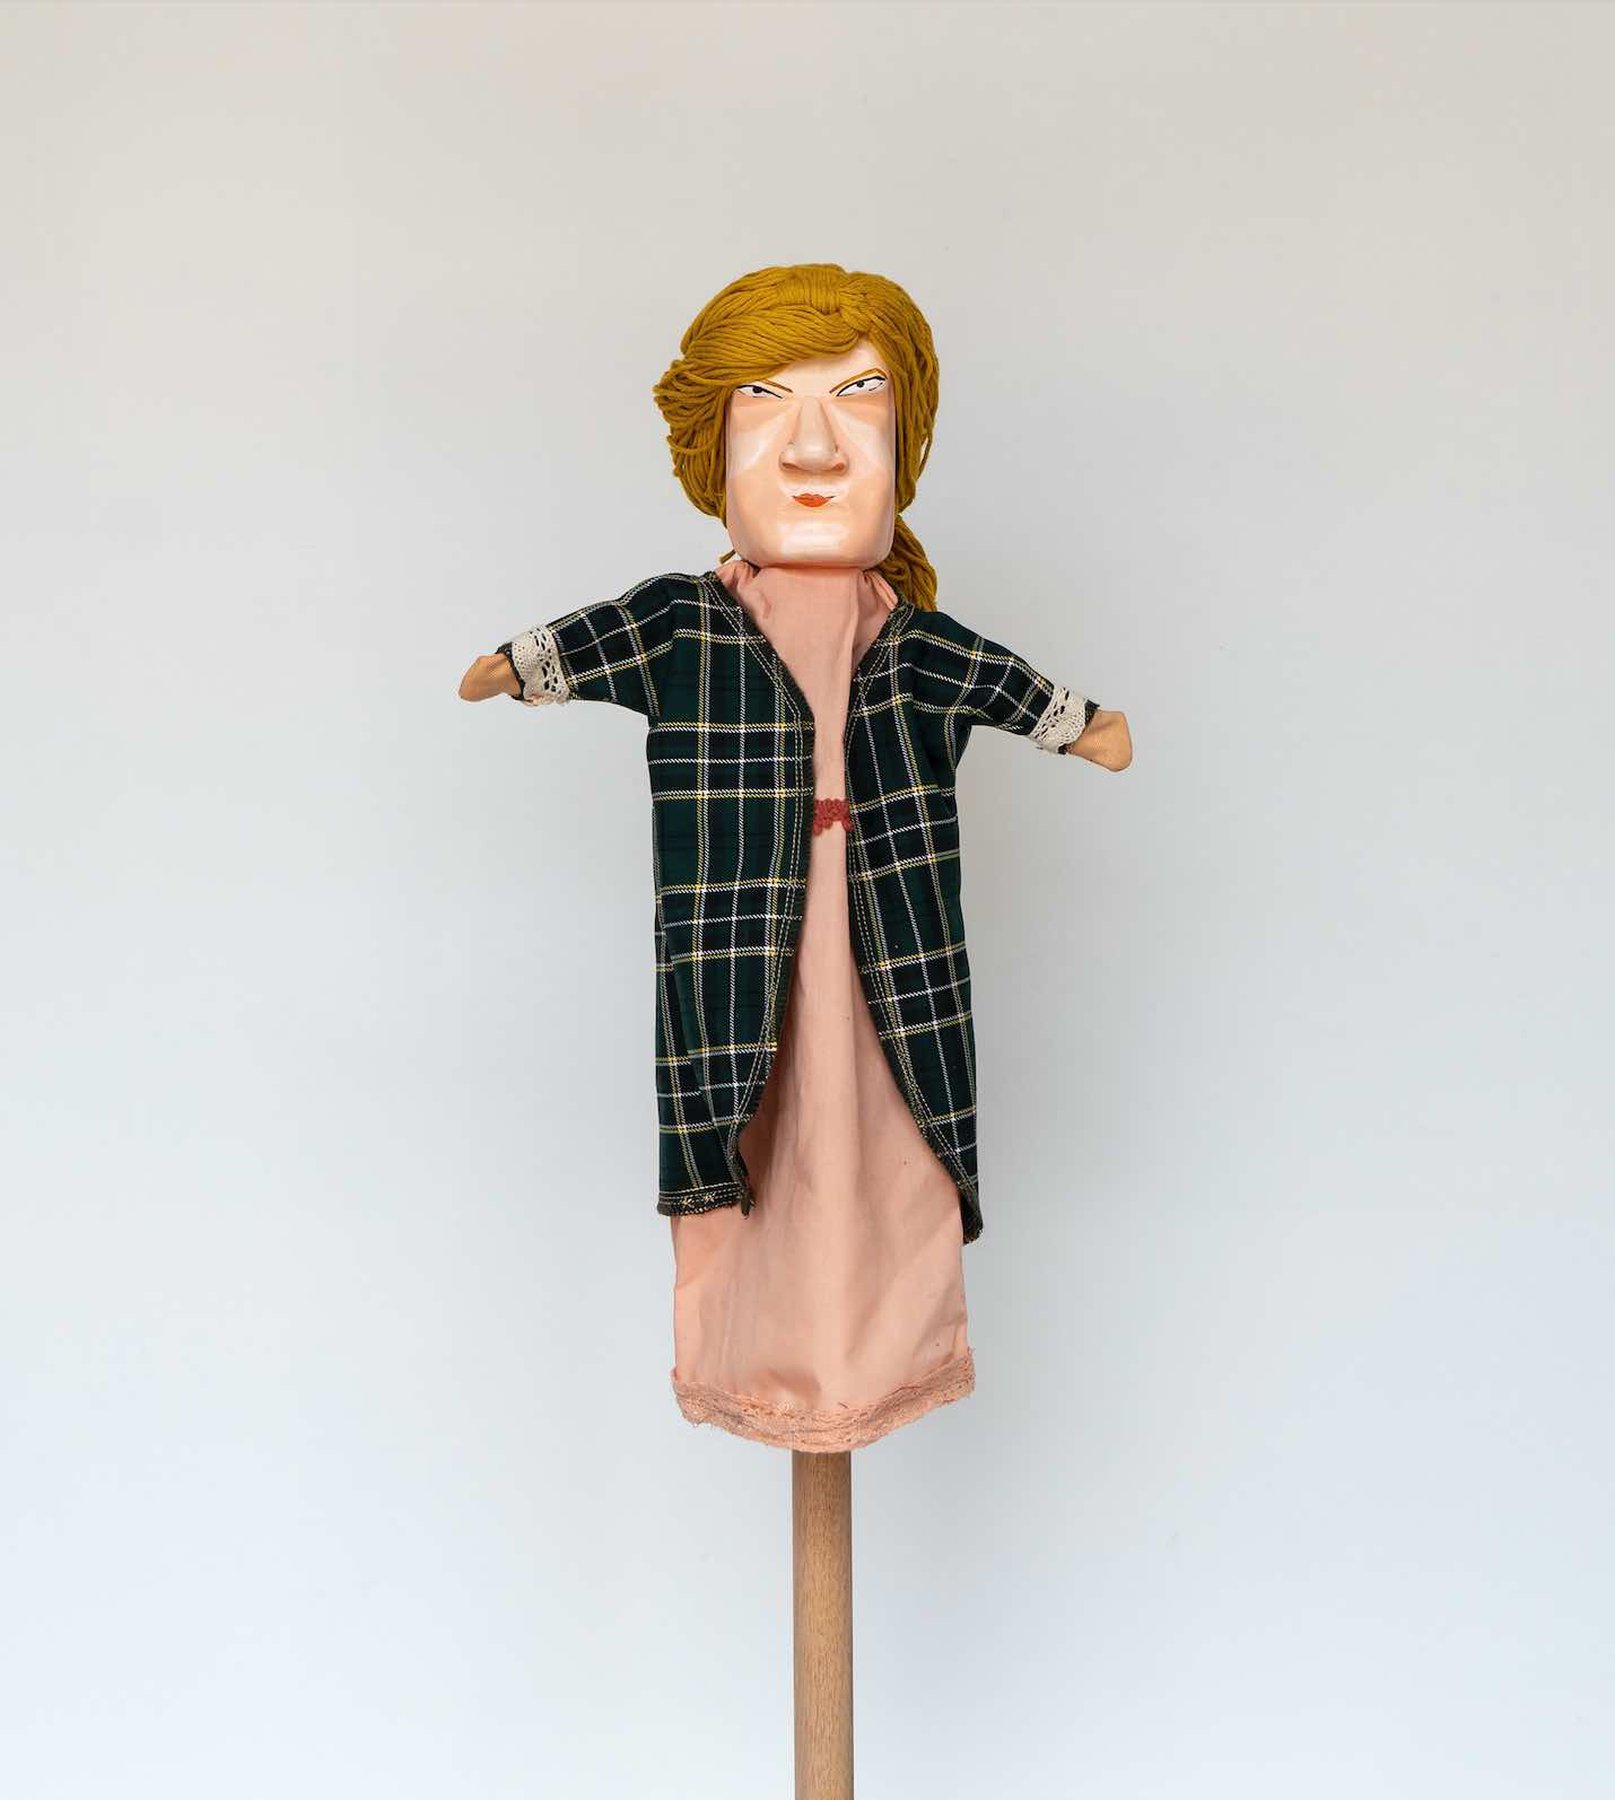 Daniela Ortiz, The Brightness of Greedy Europe, 2022, wood hand-carved, sewn, knitted and embroidered costumes (25 cm) puppet - Social worker